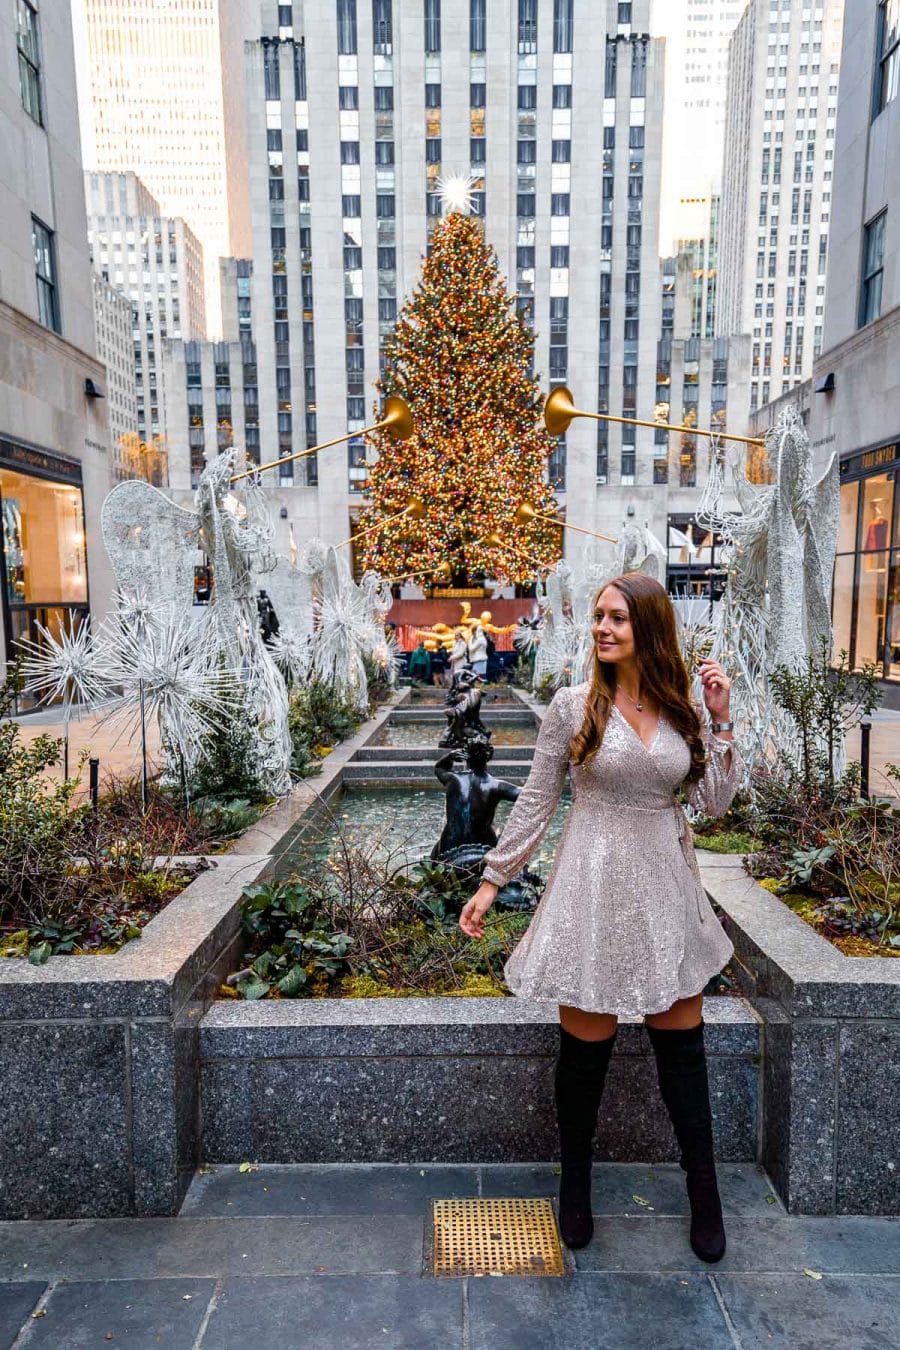 Girl standing in front of the Christmas tree at Rockefeller Center